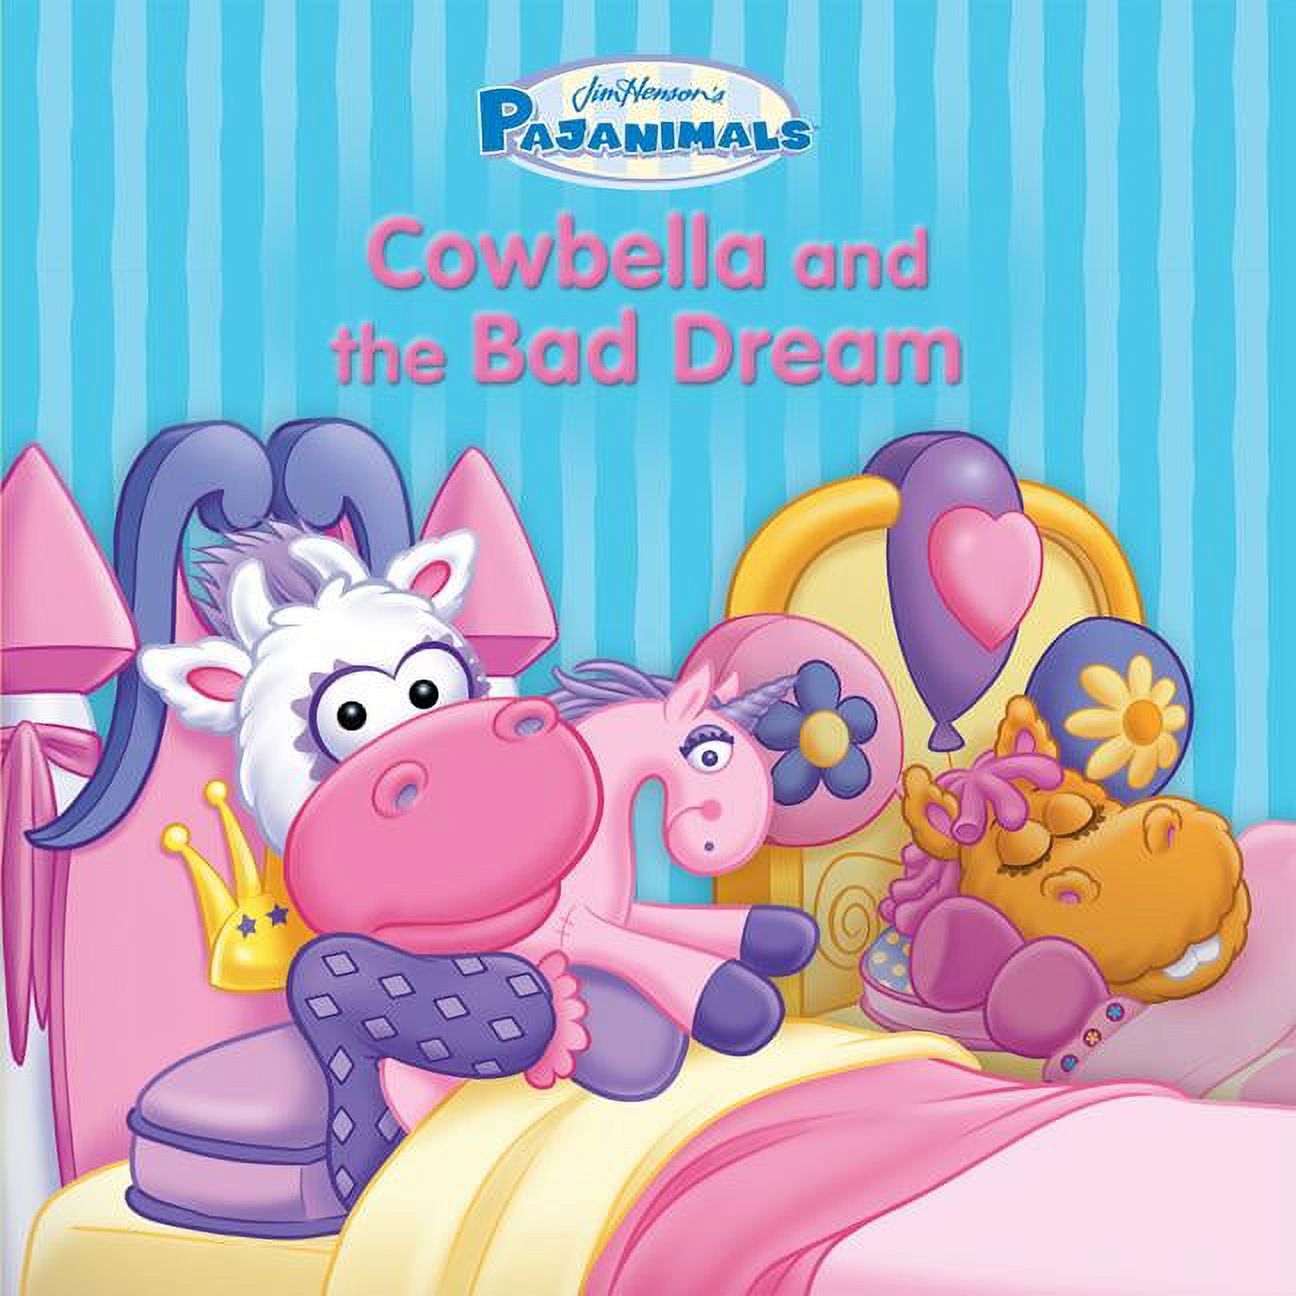 Pajanimals: Cowbella and the Bad Dream (Hardcover) by Running Press - image 1 of 1